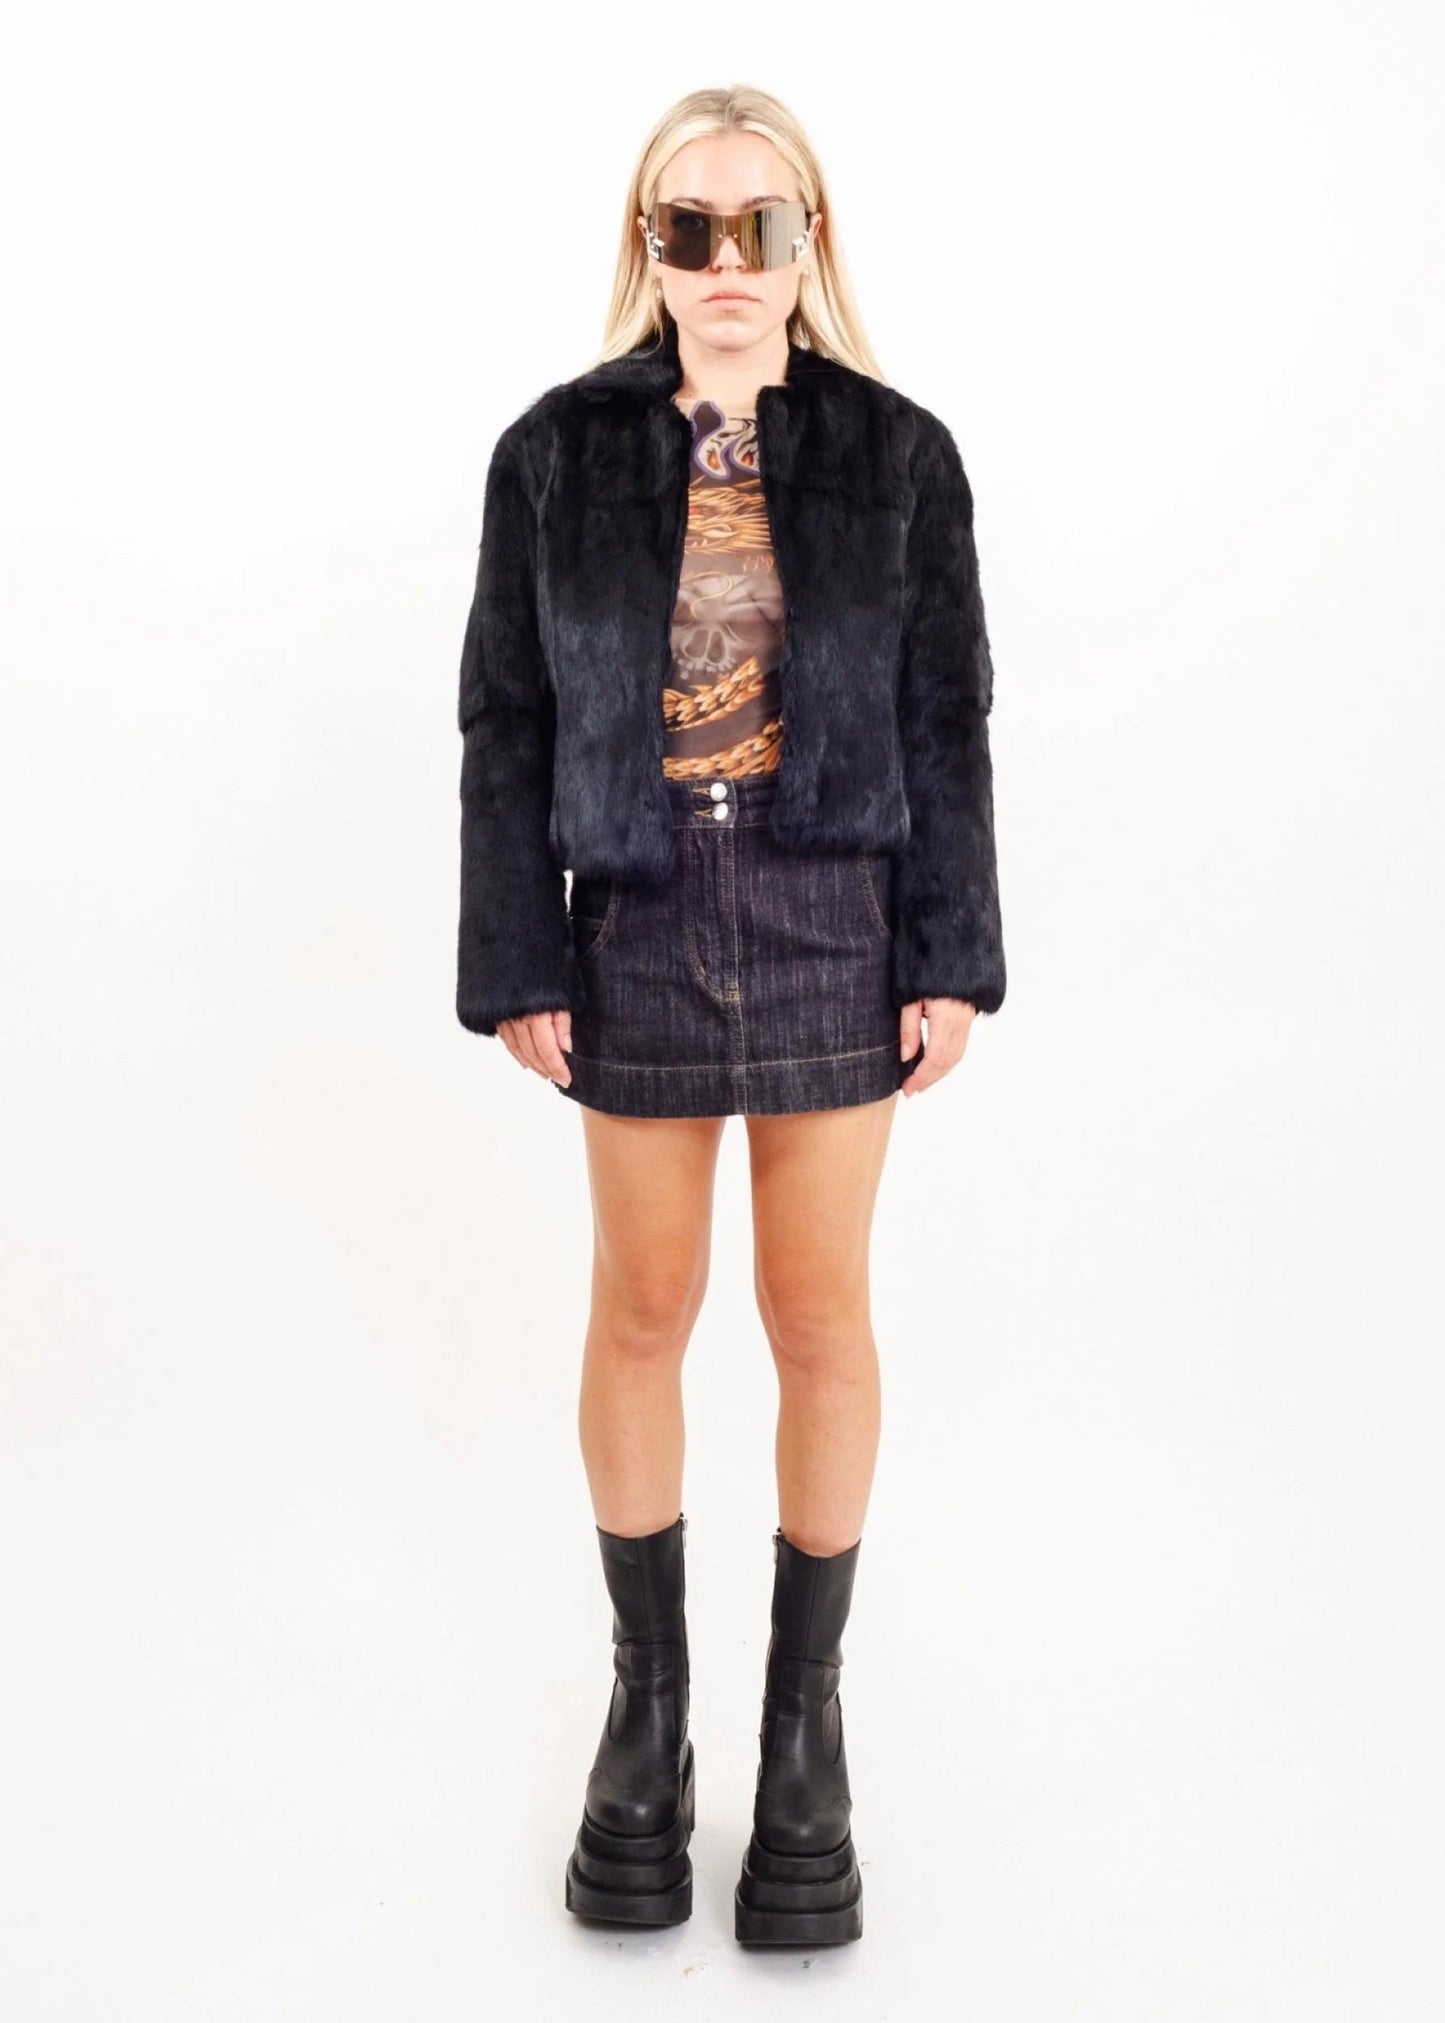 Interview Cropped fur coat